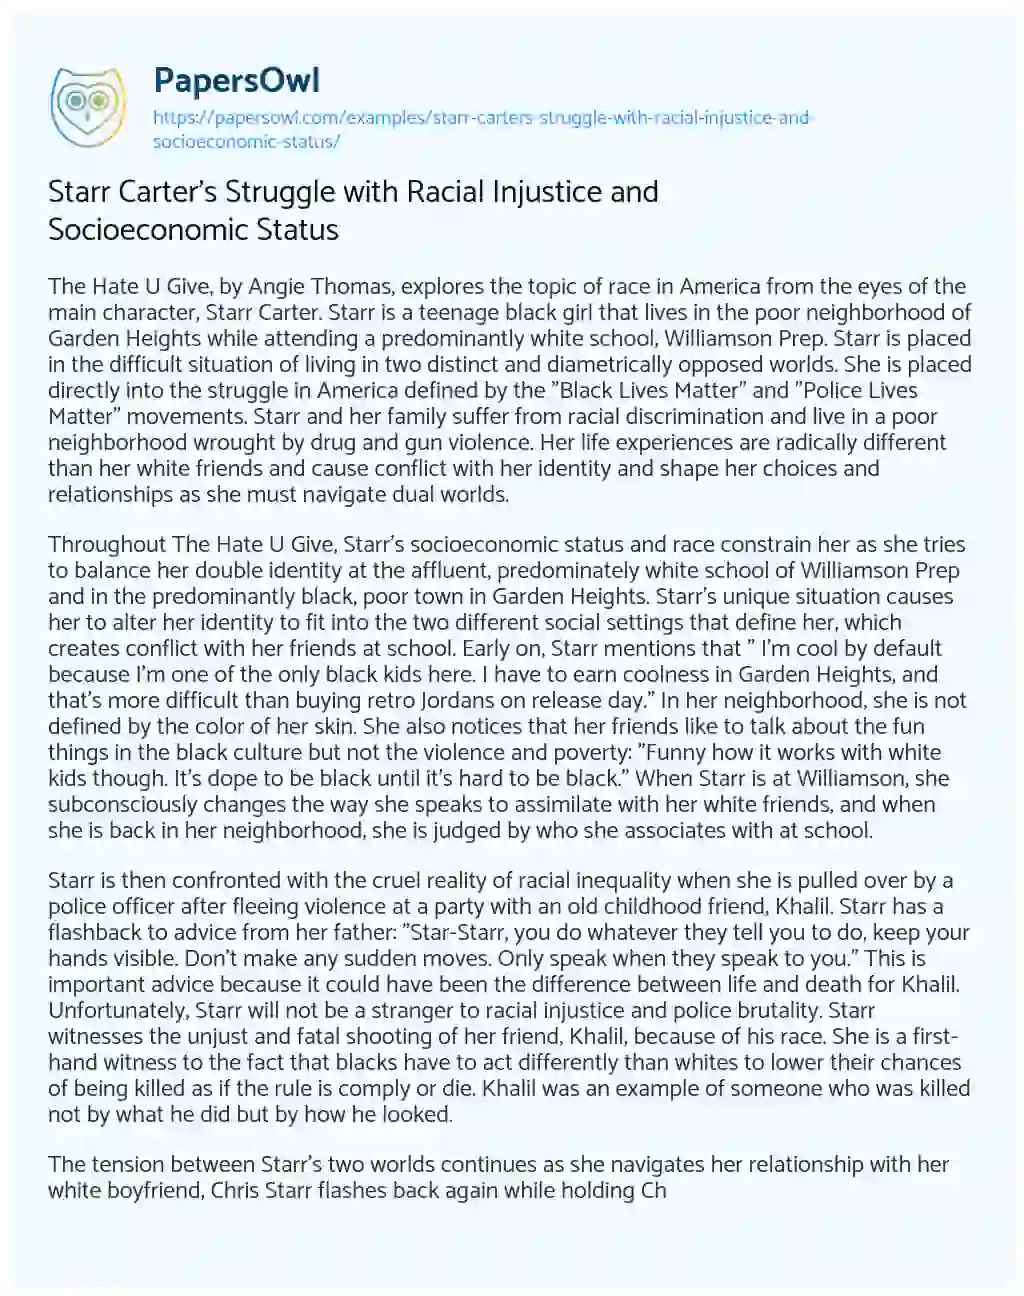 Essay on Starr Carter’s Struggle with Racial Injustice and Socioeconomic Status